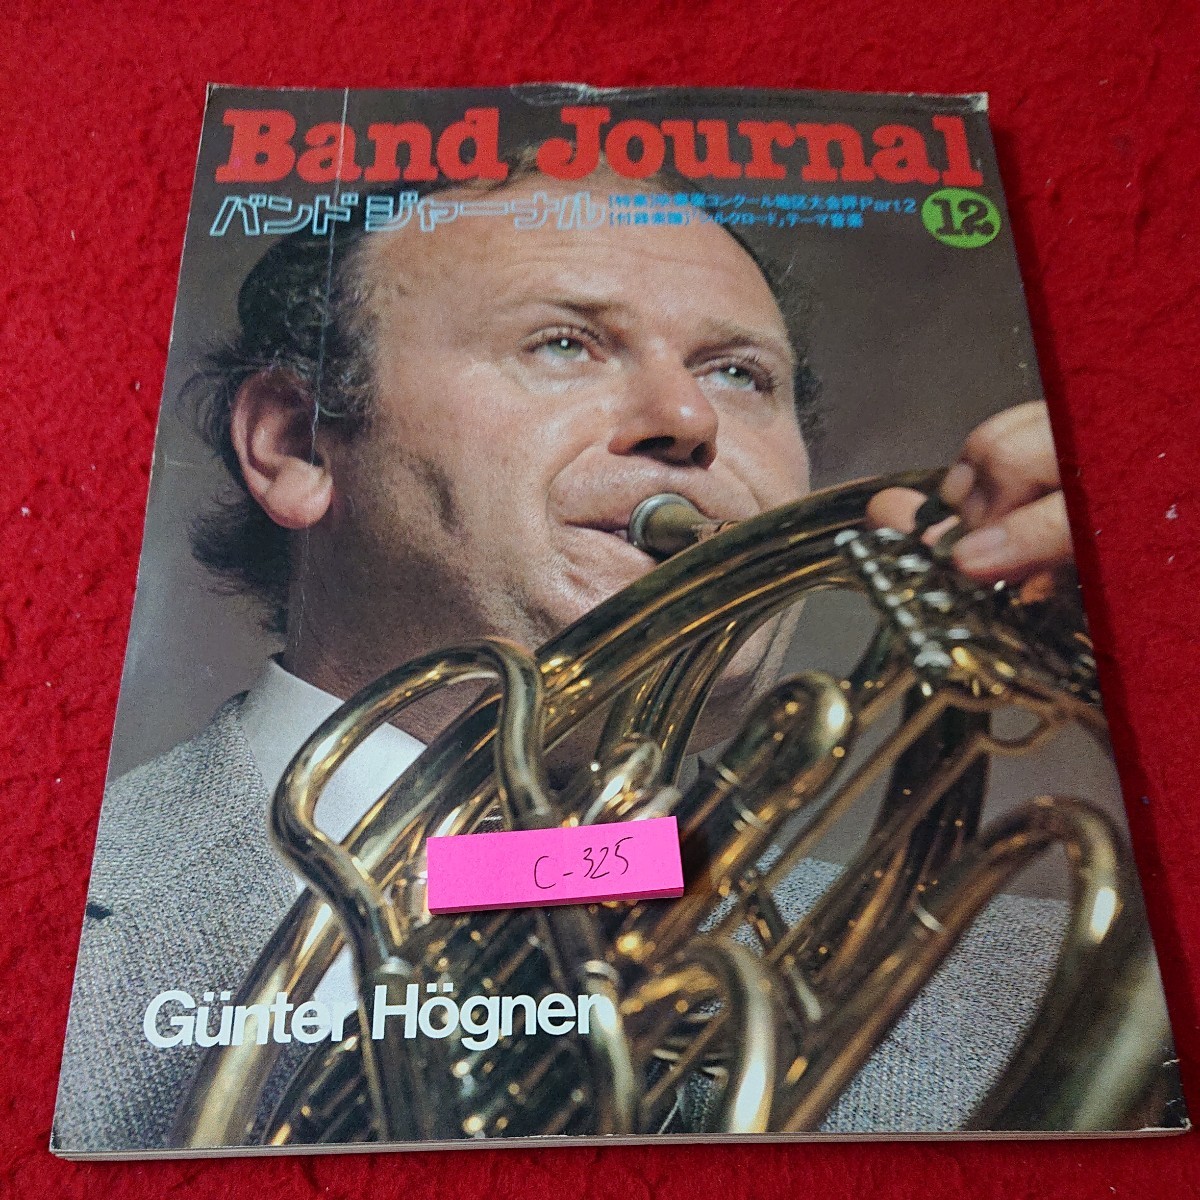 c-325 band journal 12 month number special collection wind instrumental music navy blue cool district convention judgement part 2 etc. eyes next unknown Showa era 55 year issue music .. company *6